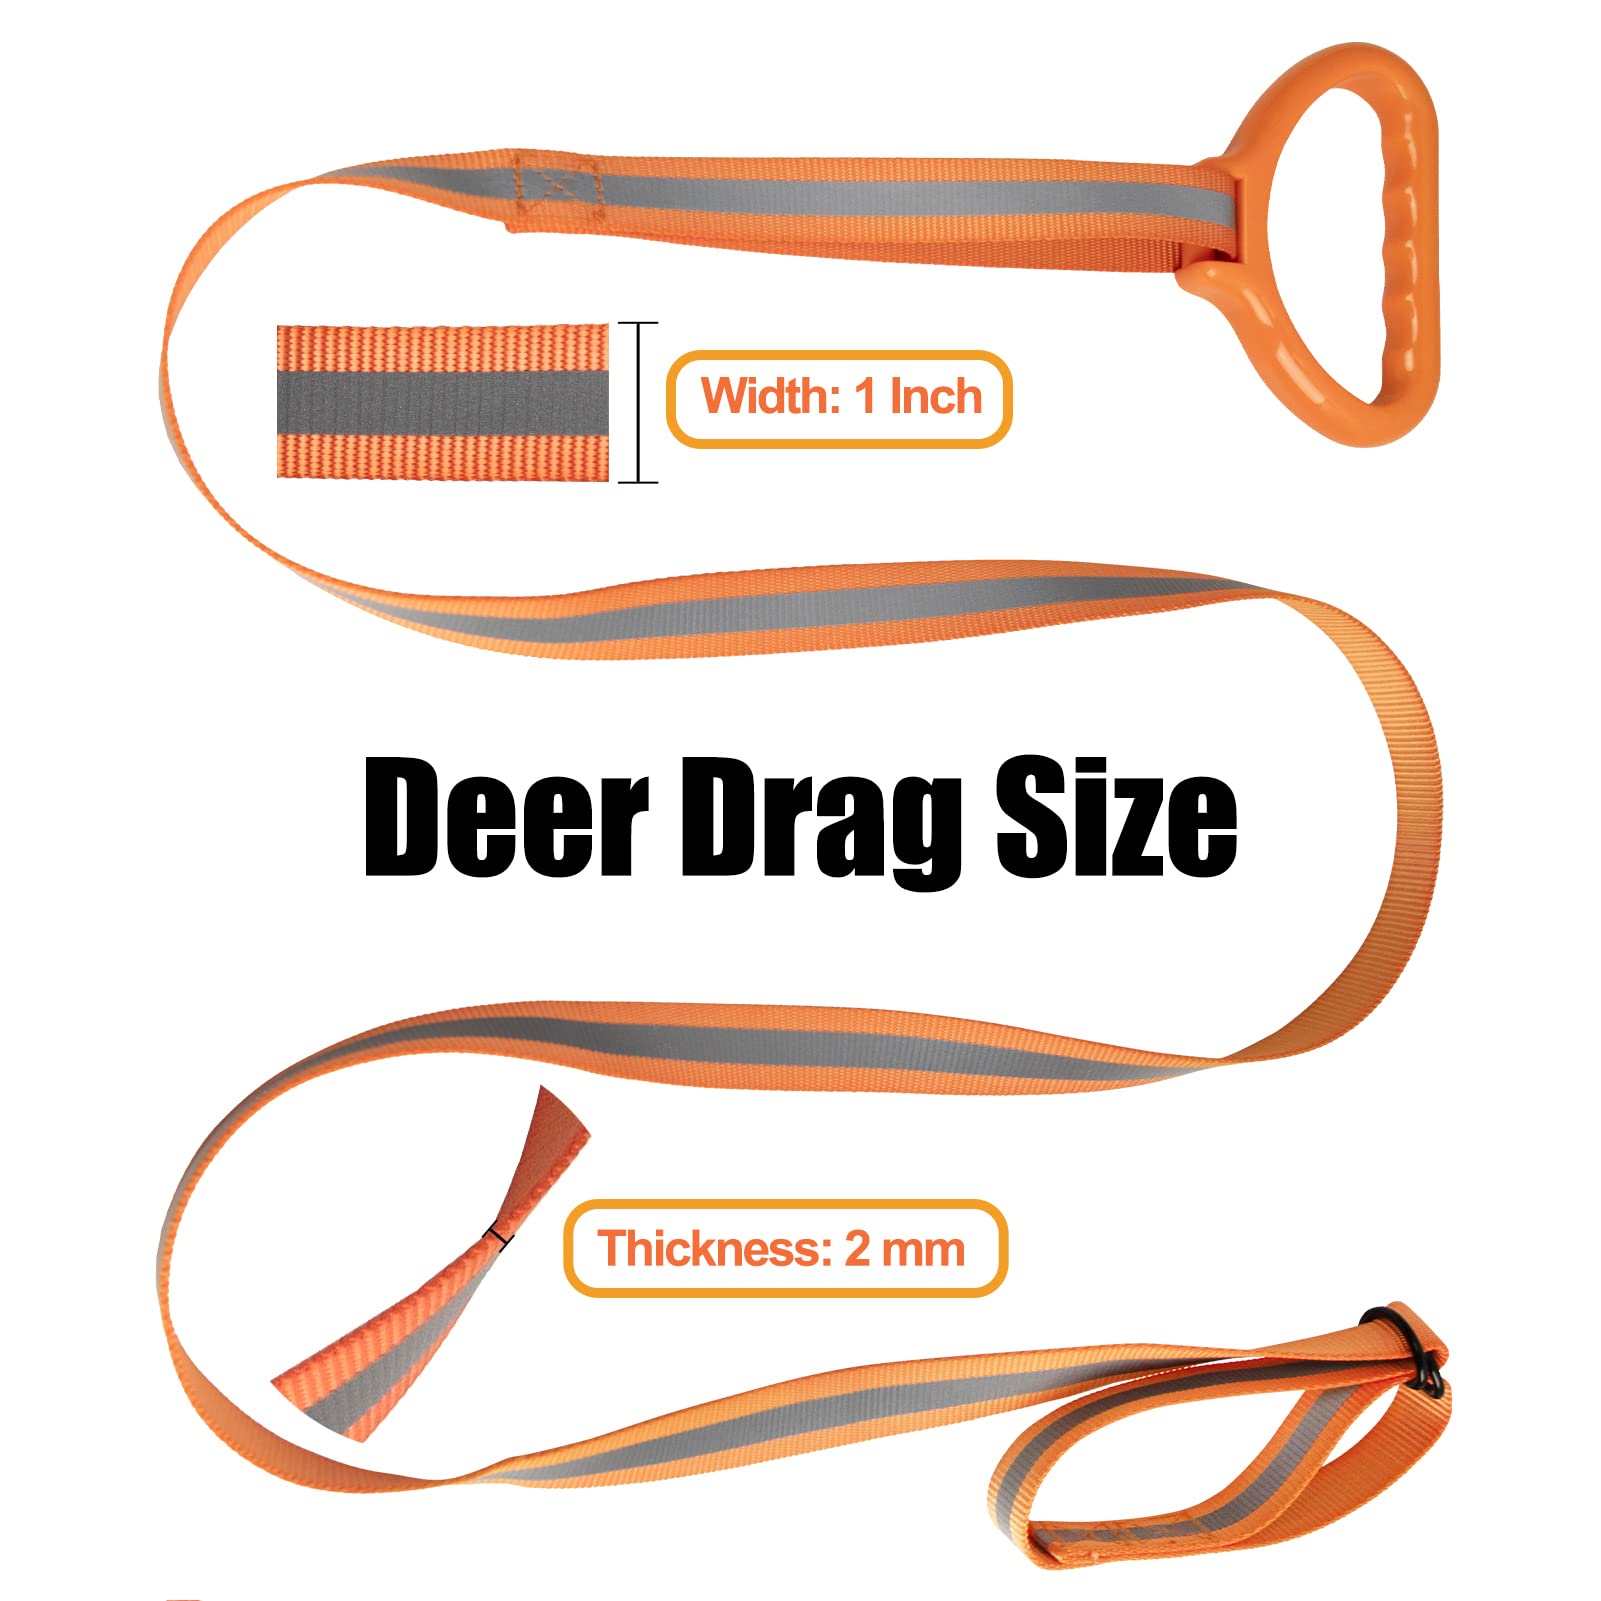 Hunthor 6.3ft Deer Drag Rope with Handle for Hunting Gear, 600lbs Deer Drag Harness, Deer Hunting Accessories for Big and Small Game